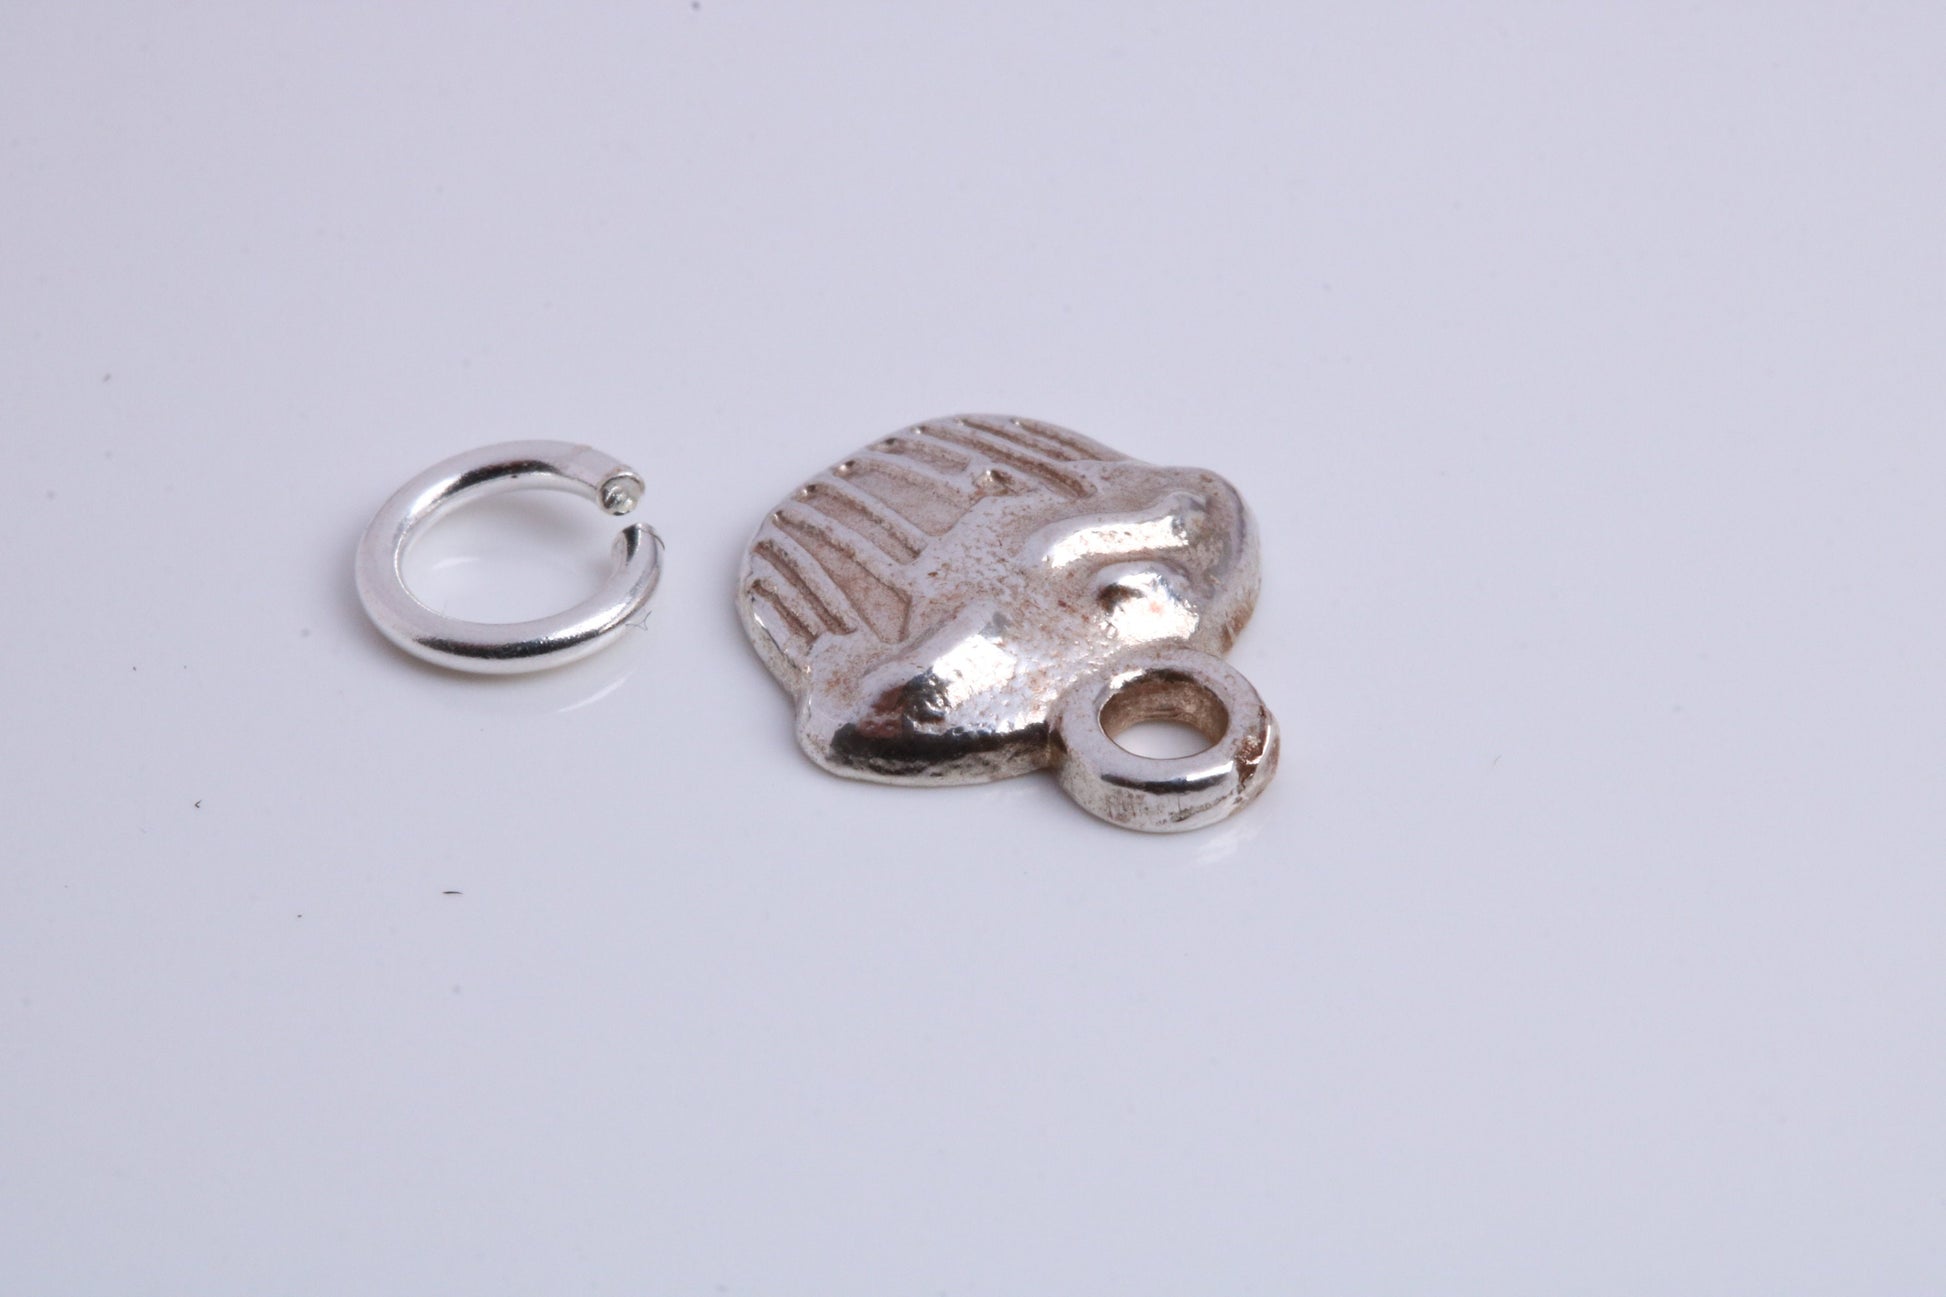 Cup Cake Charm, Traditional Charm, Made from Solid 925 Grade Sterling Silver, Complete with Attachment Link